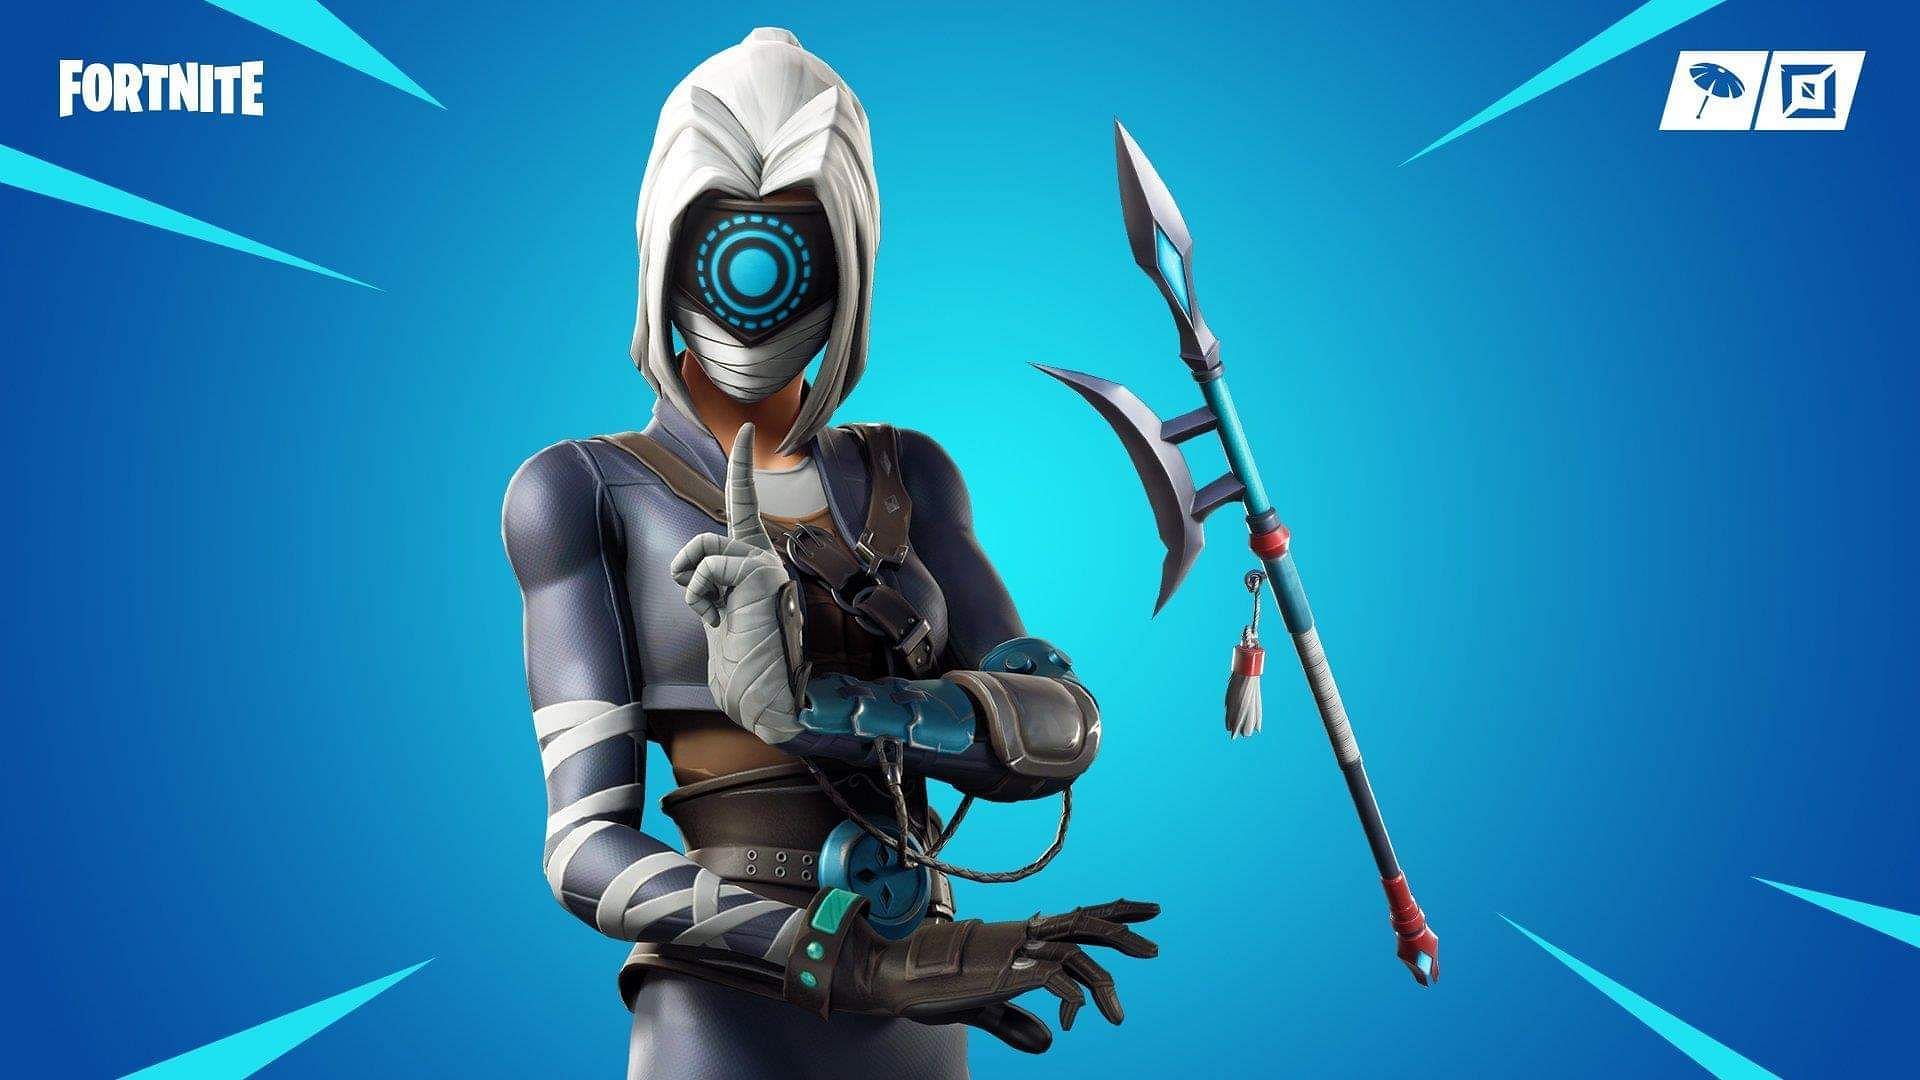 Focus is the fifth-most popular Fortnite skin in the season (Image via Epic Games)